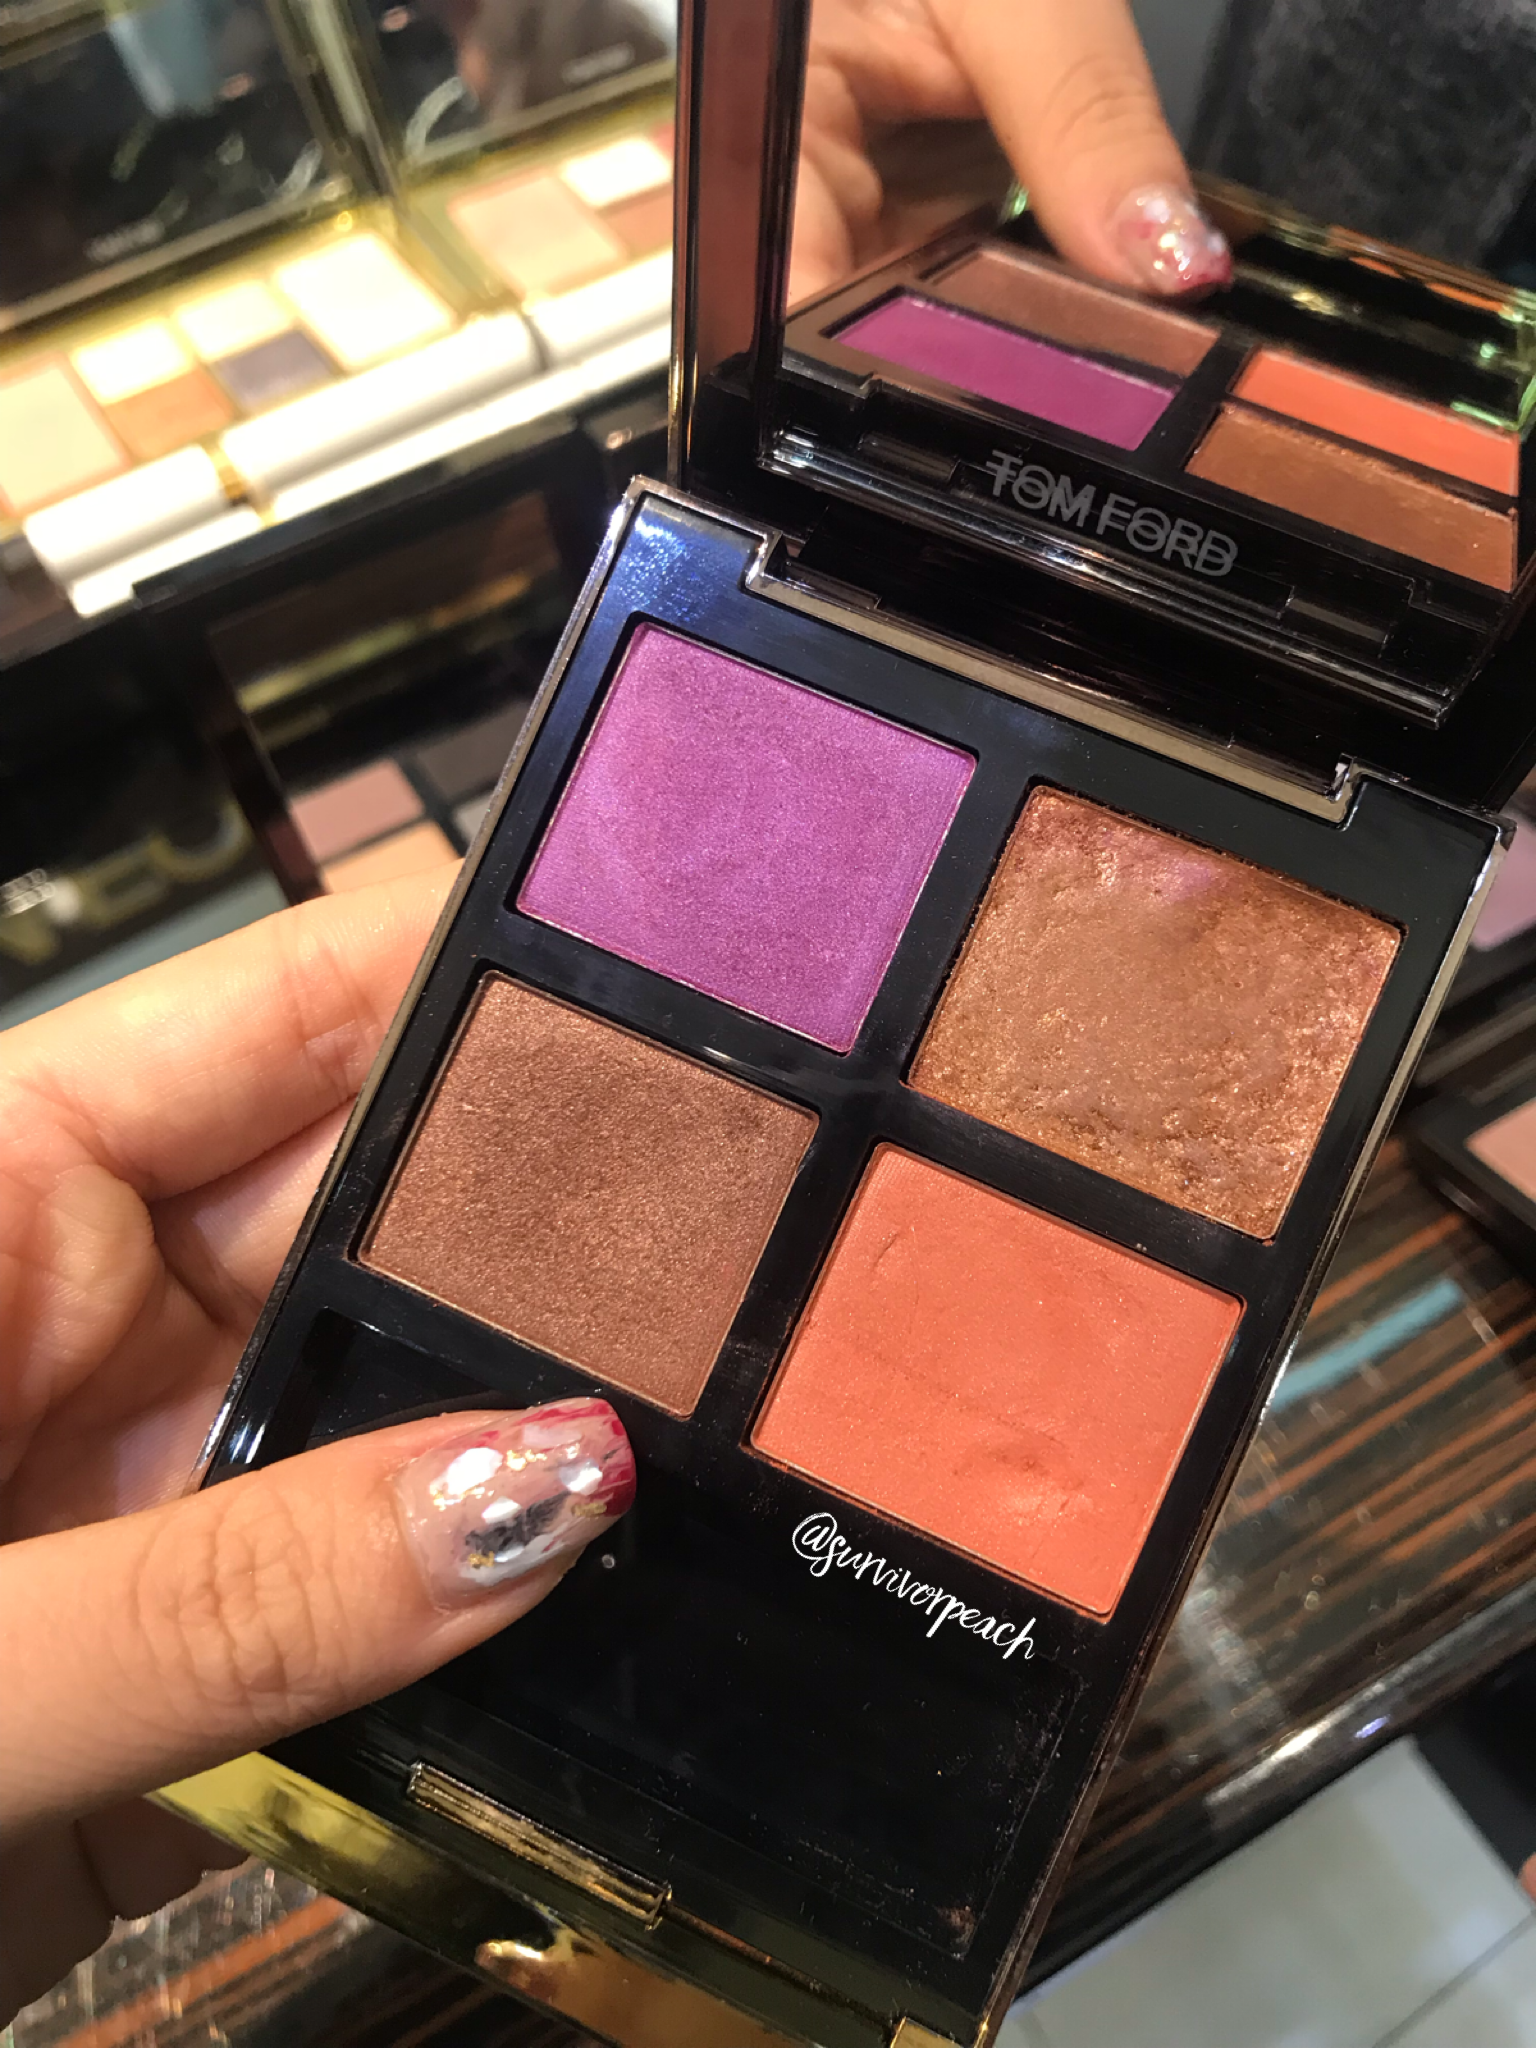 Tom Ford Eye Quad additions for 2019: Swatches and my picks ...